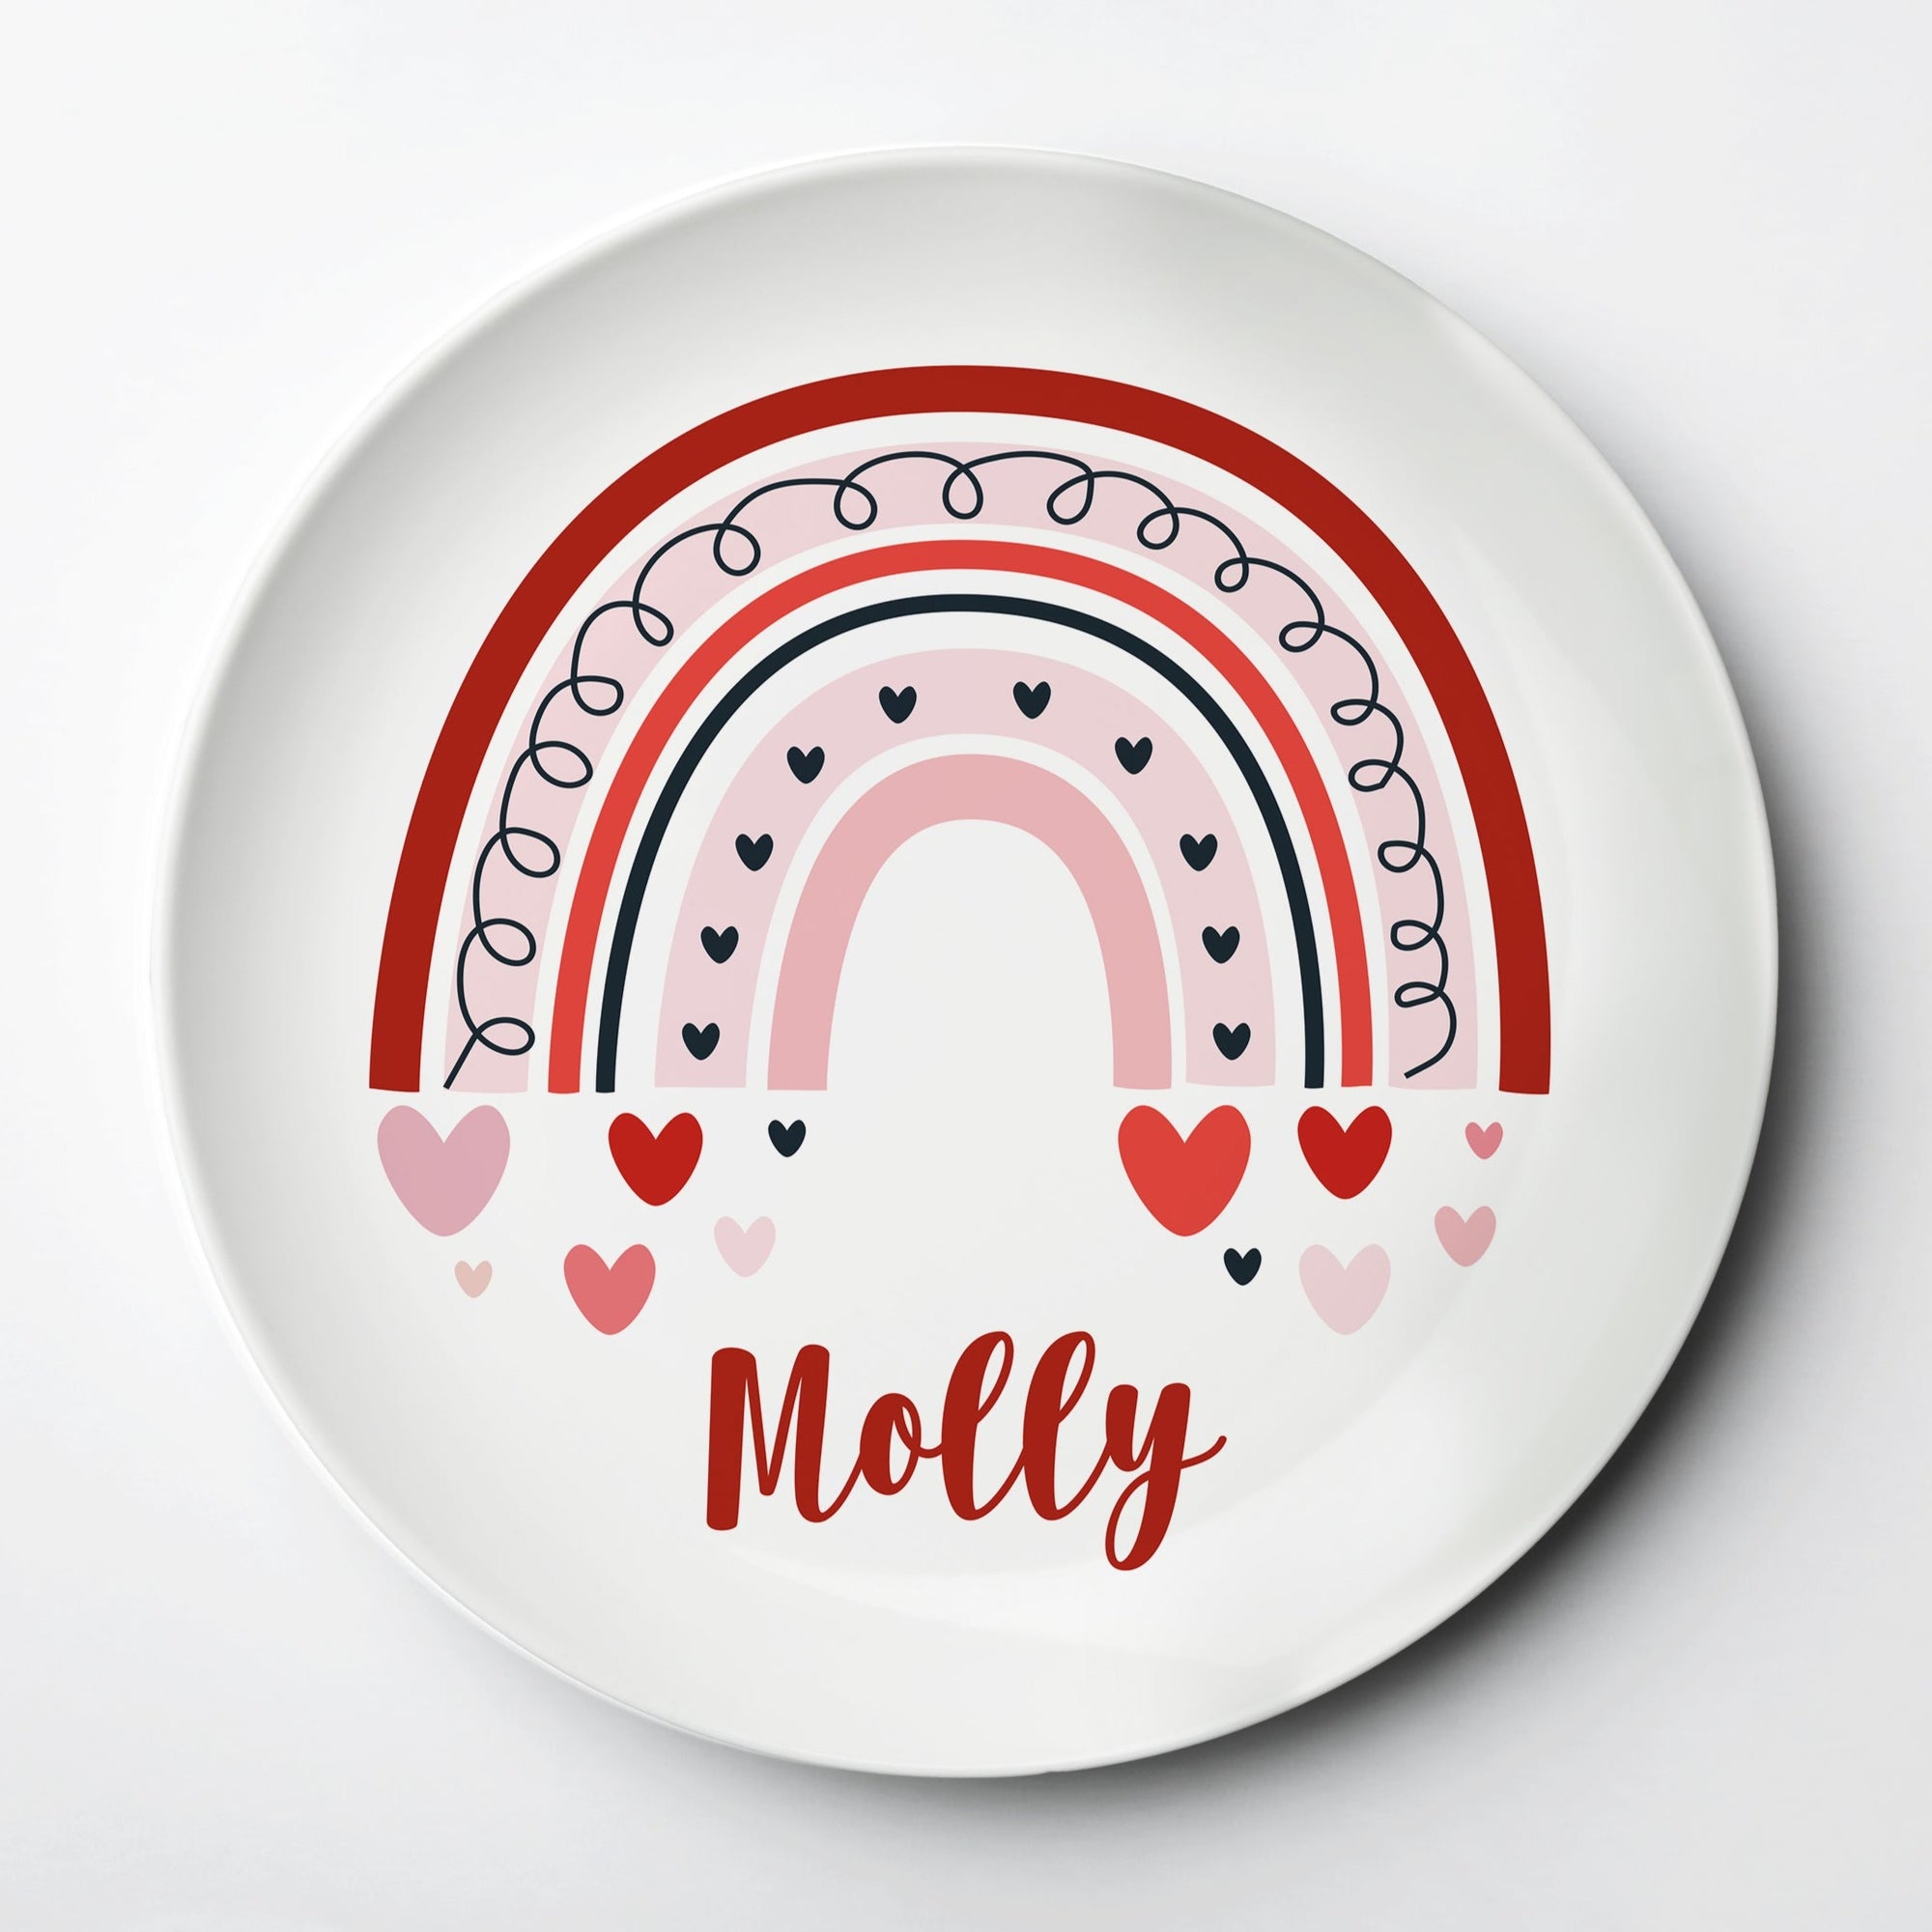 Rainbow personalized Valentine's Day Plate, ThermoSāf® kids reusable plate, microwave, dishwasher and oven safe.  Made in the USA, Pipsy.com